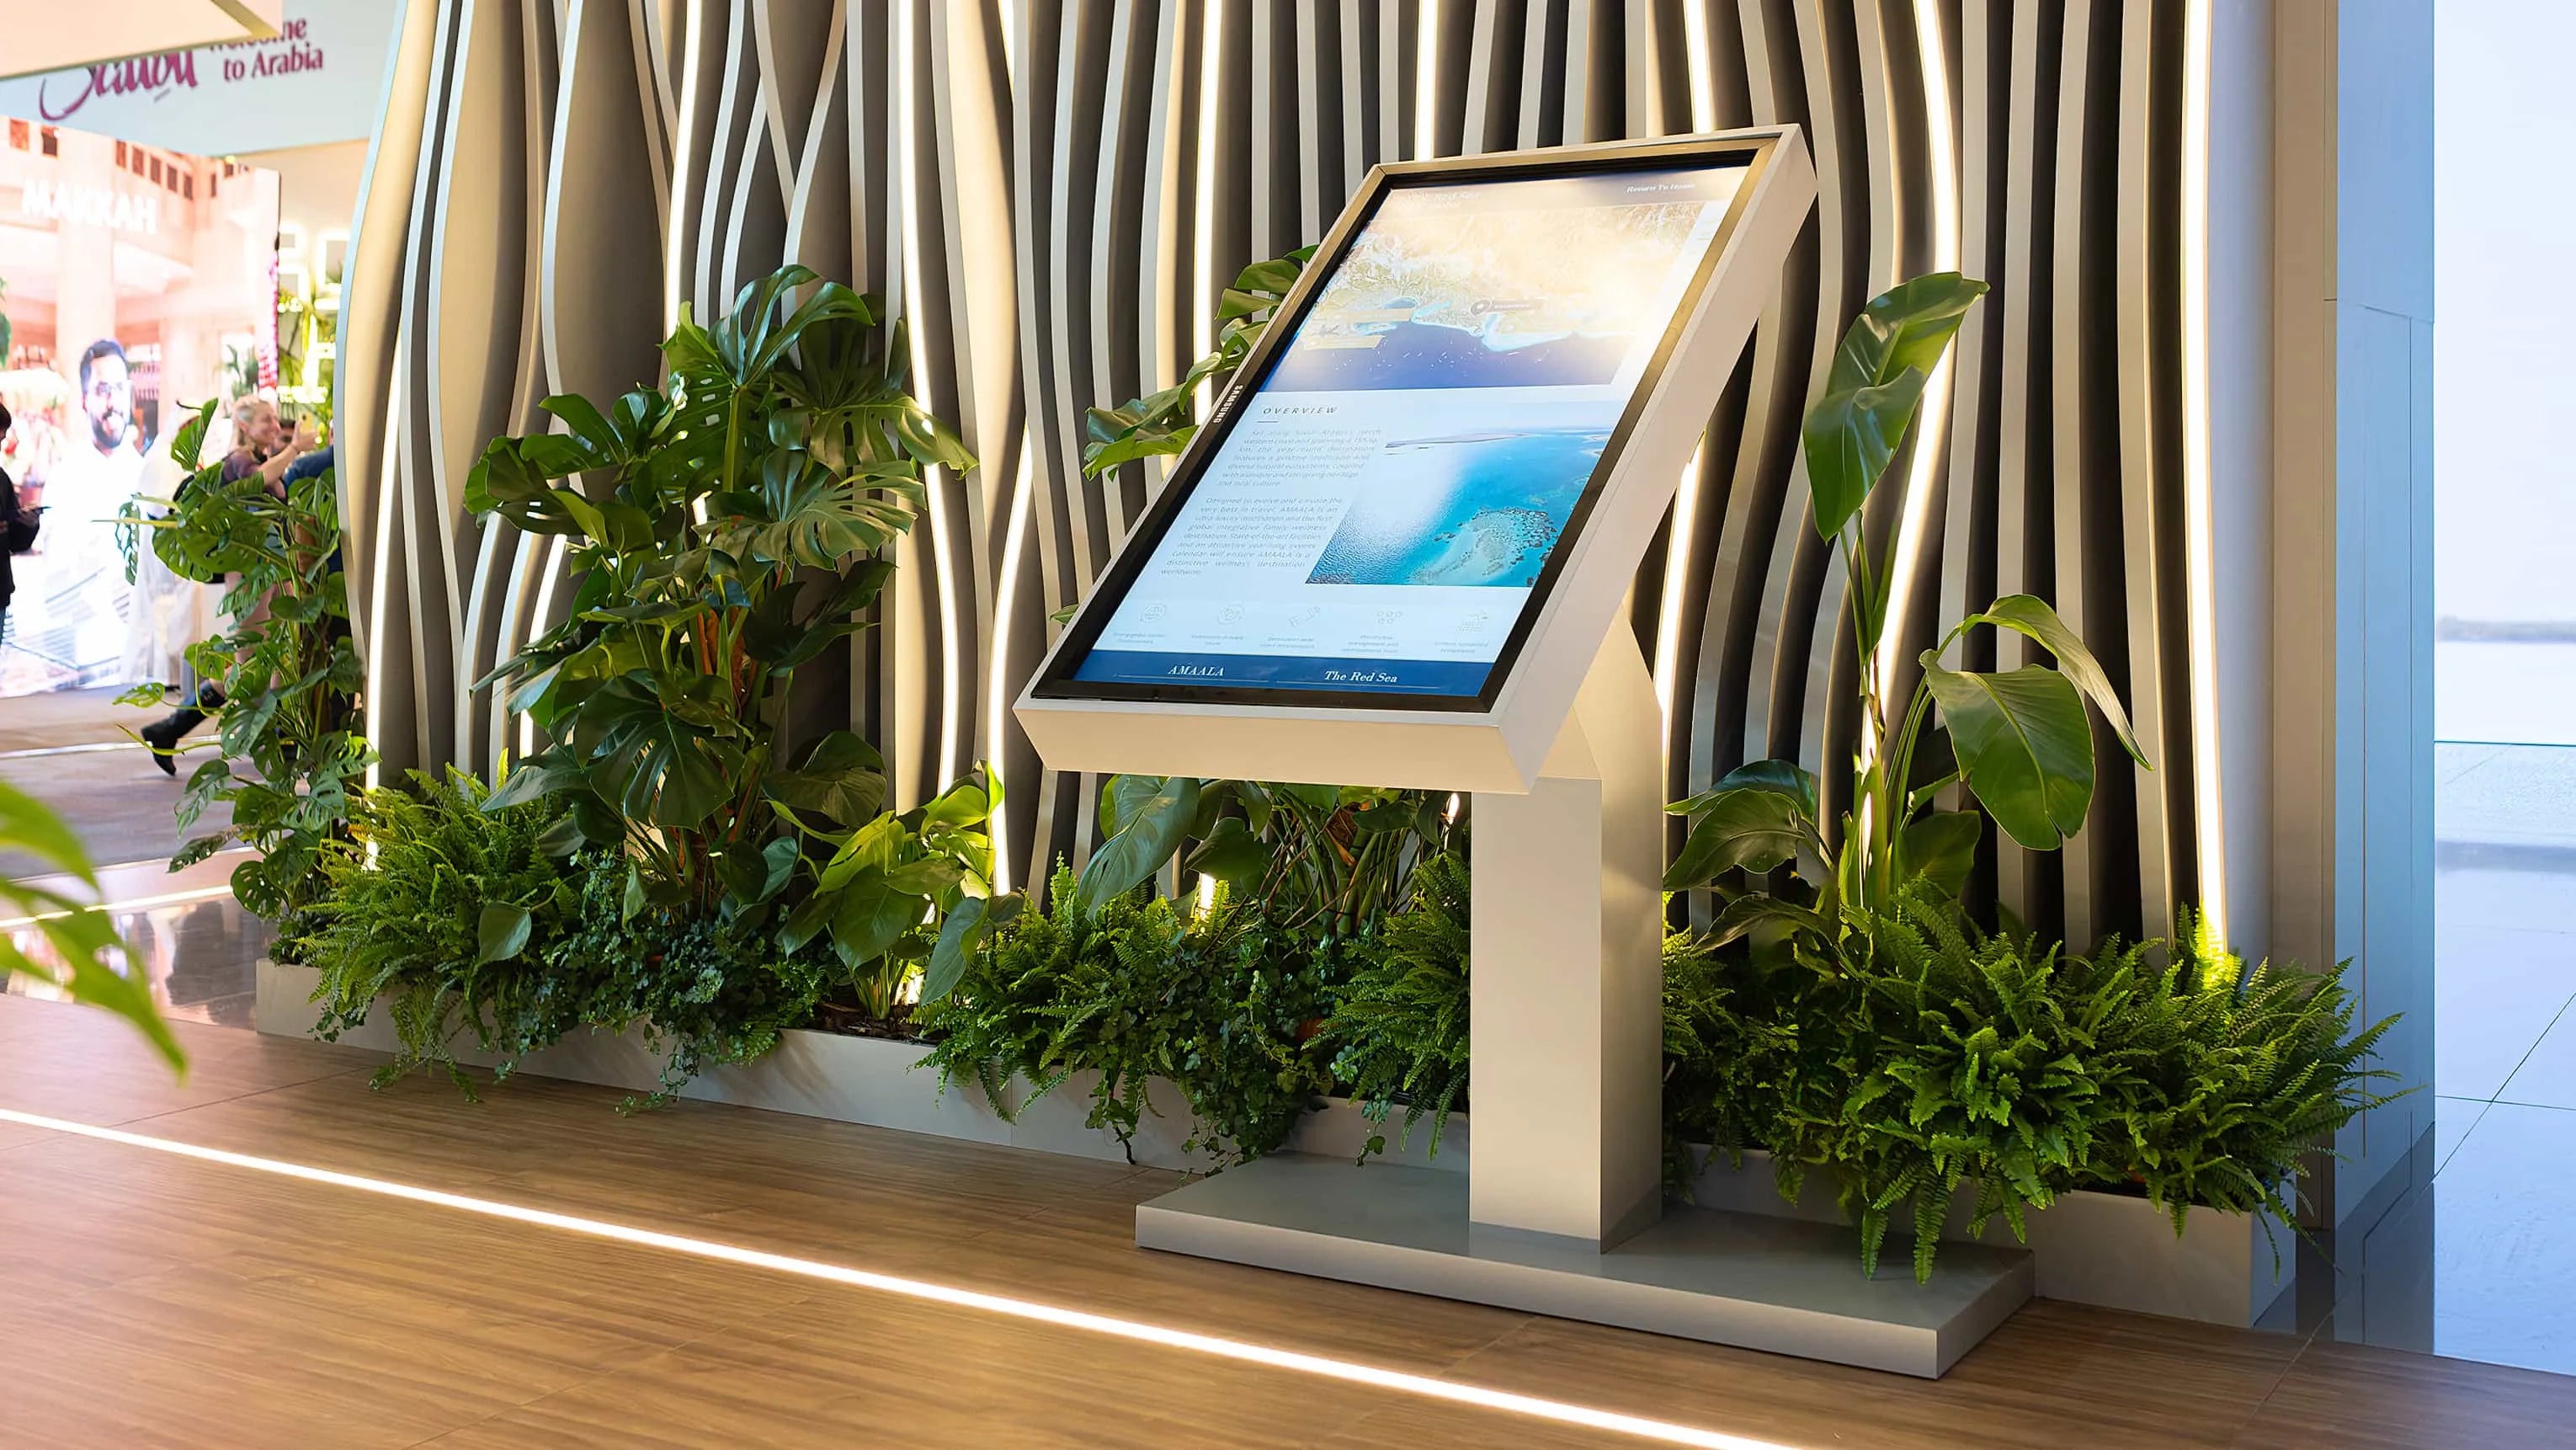 Amaranté London enhanced this WTM presentation area with lush greenery surrounding an interactive display, merging technology with nature.